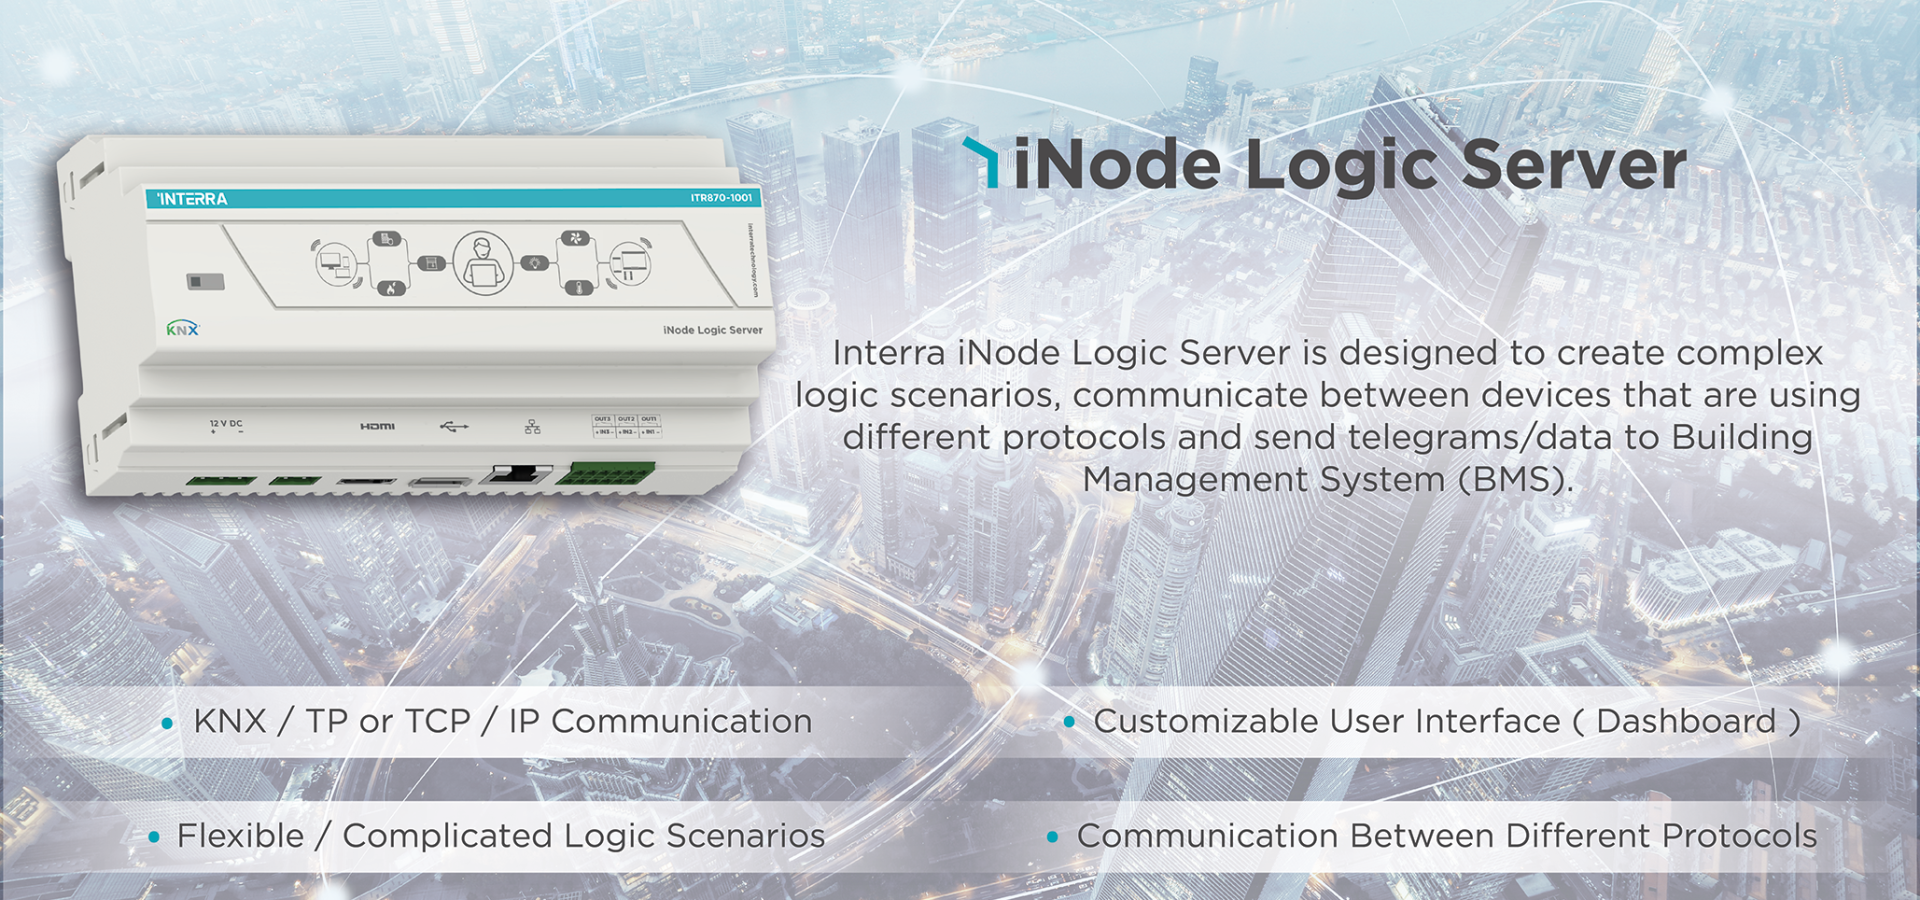 The Future of Smart Buildings is shaped by iNode Logic Server